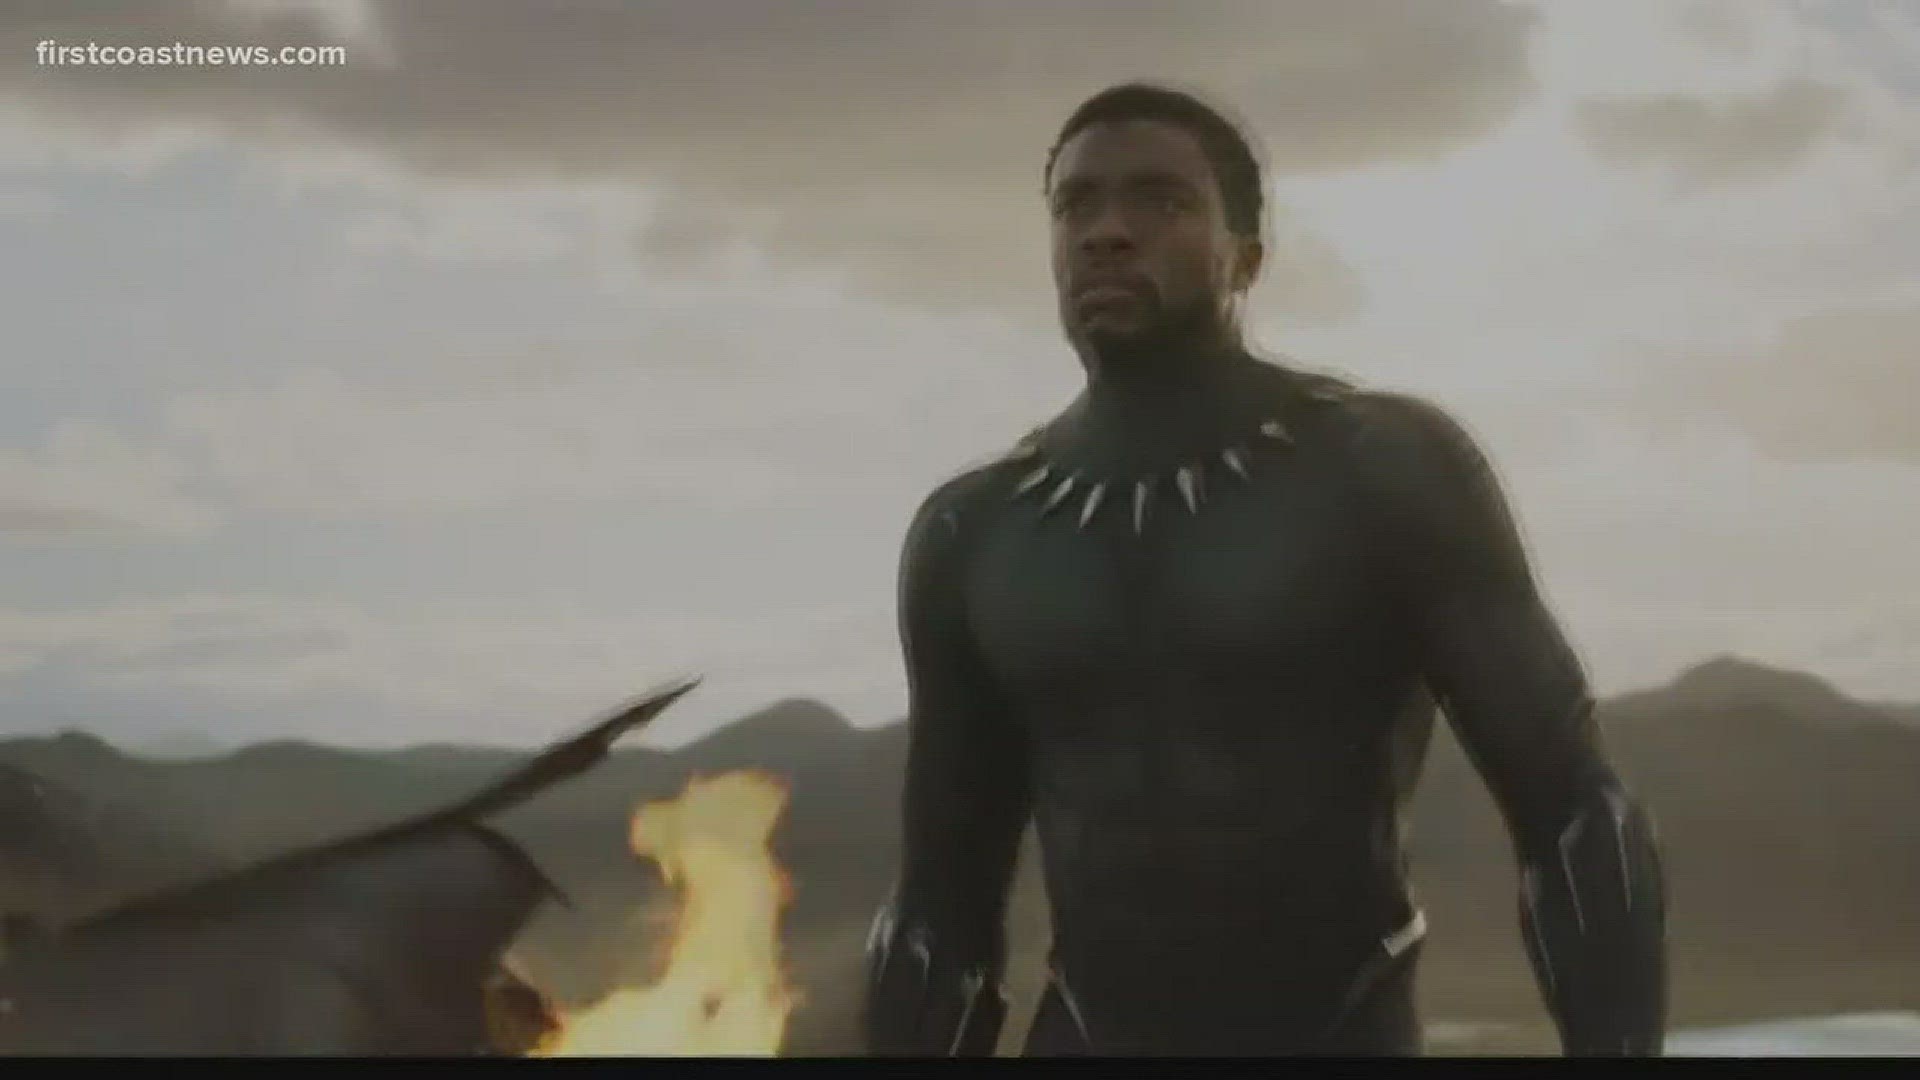 "Black Panther" is already becoming a major hit at the box office and with critics, but there's a local connection to the film. Eric Alvarez has this story.